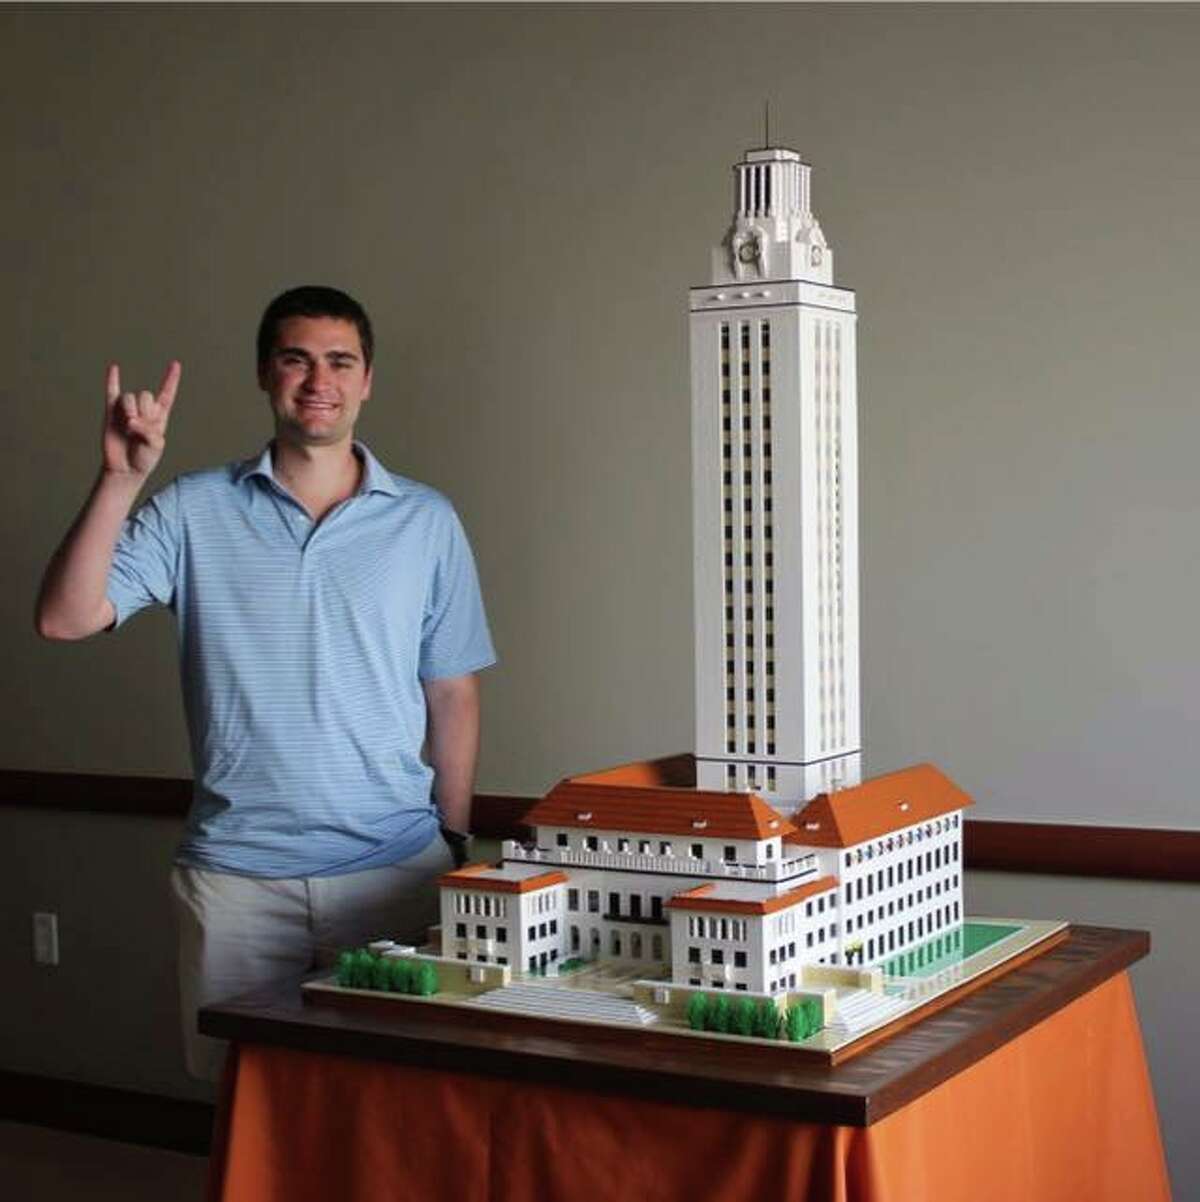 Hamilton Leiser, a University of Texas at Austin student, constructed a four-foot-tall replica of the university's iconic Tower using 15,000 Lego pieces.